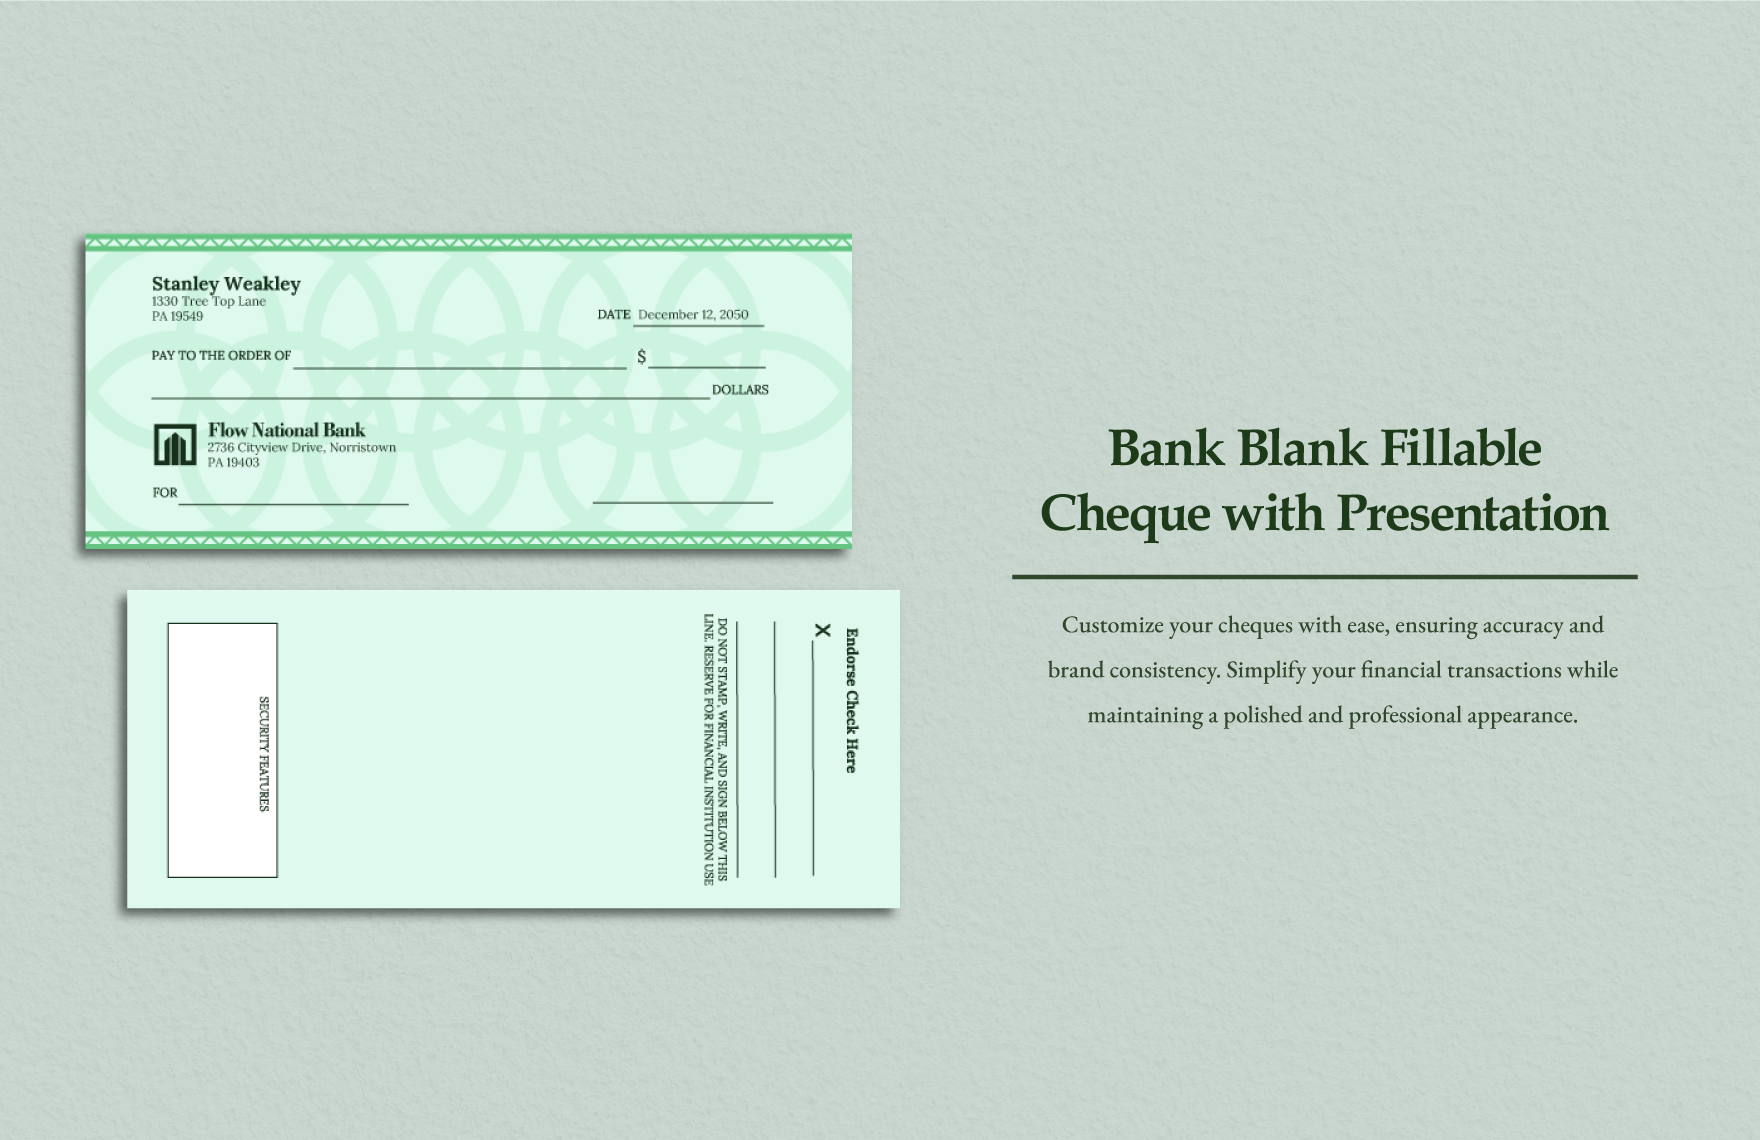 Bank Blank Fillable Cheque with Presentation